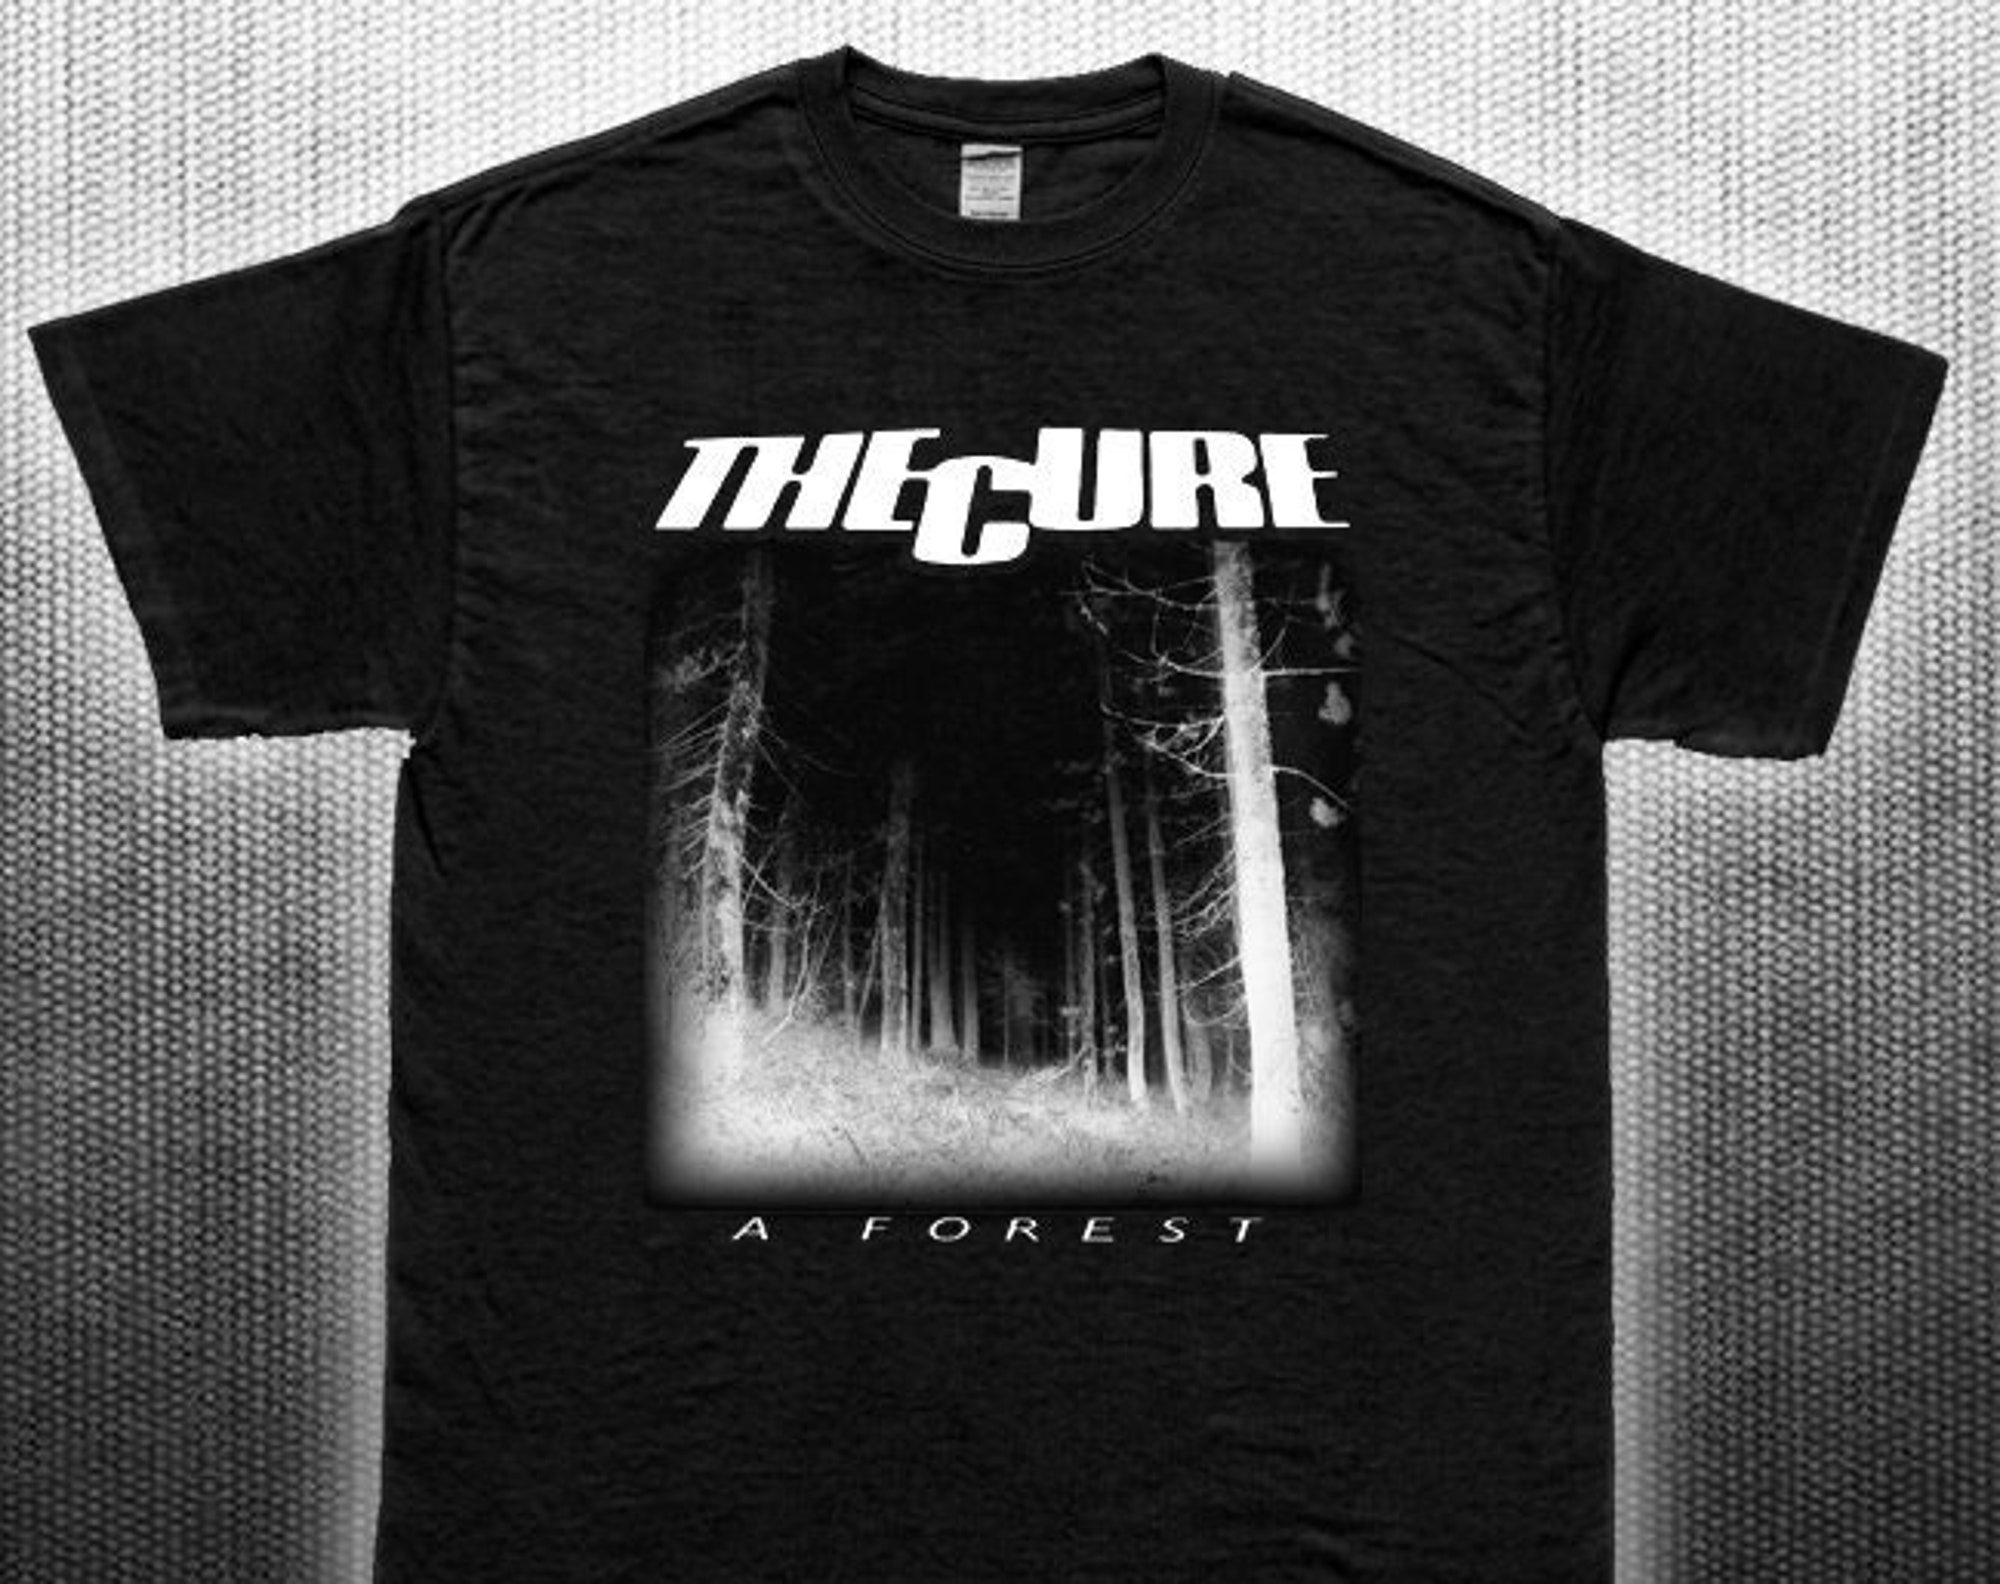 The Cure "A Forest" T-shirt